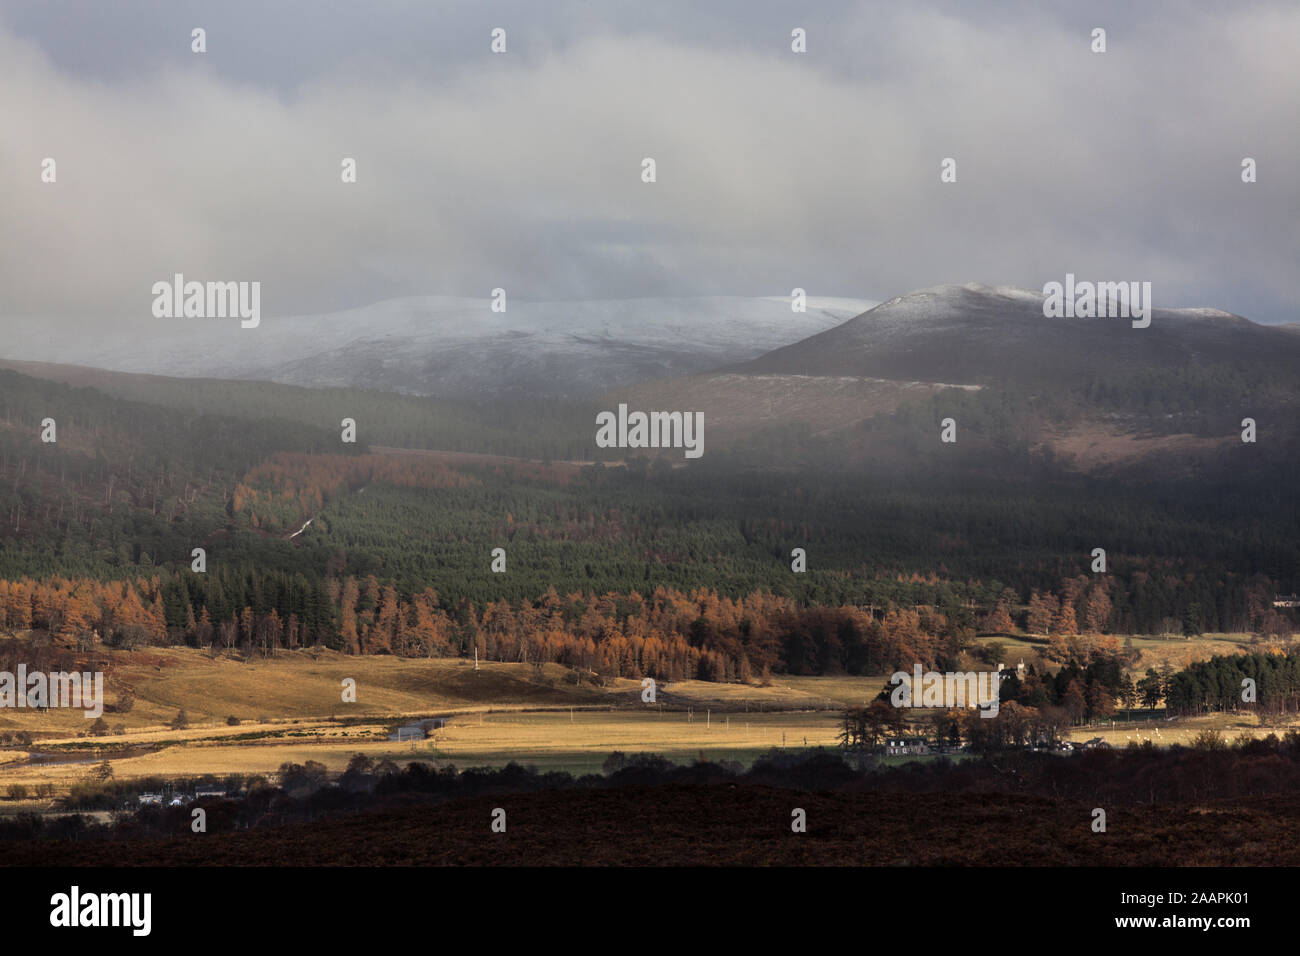 Area of Braemar, Scotland. Picturesque winter view of snow approaching the Cairngorm Mountains, near the village of Braemar. Stock Photo